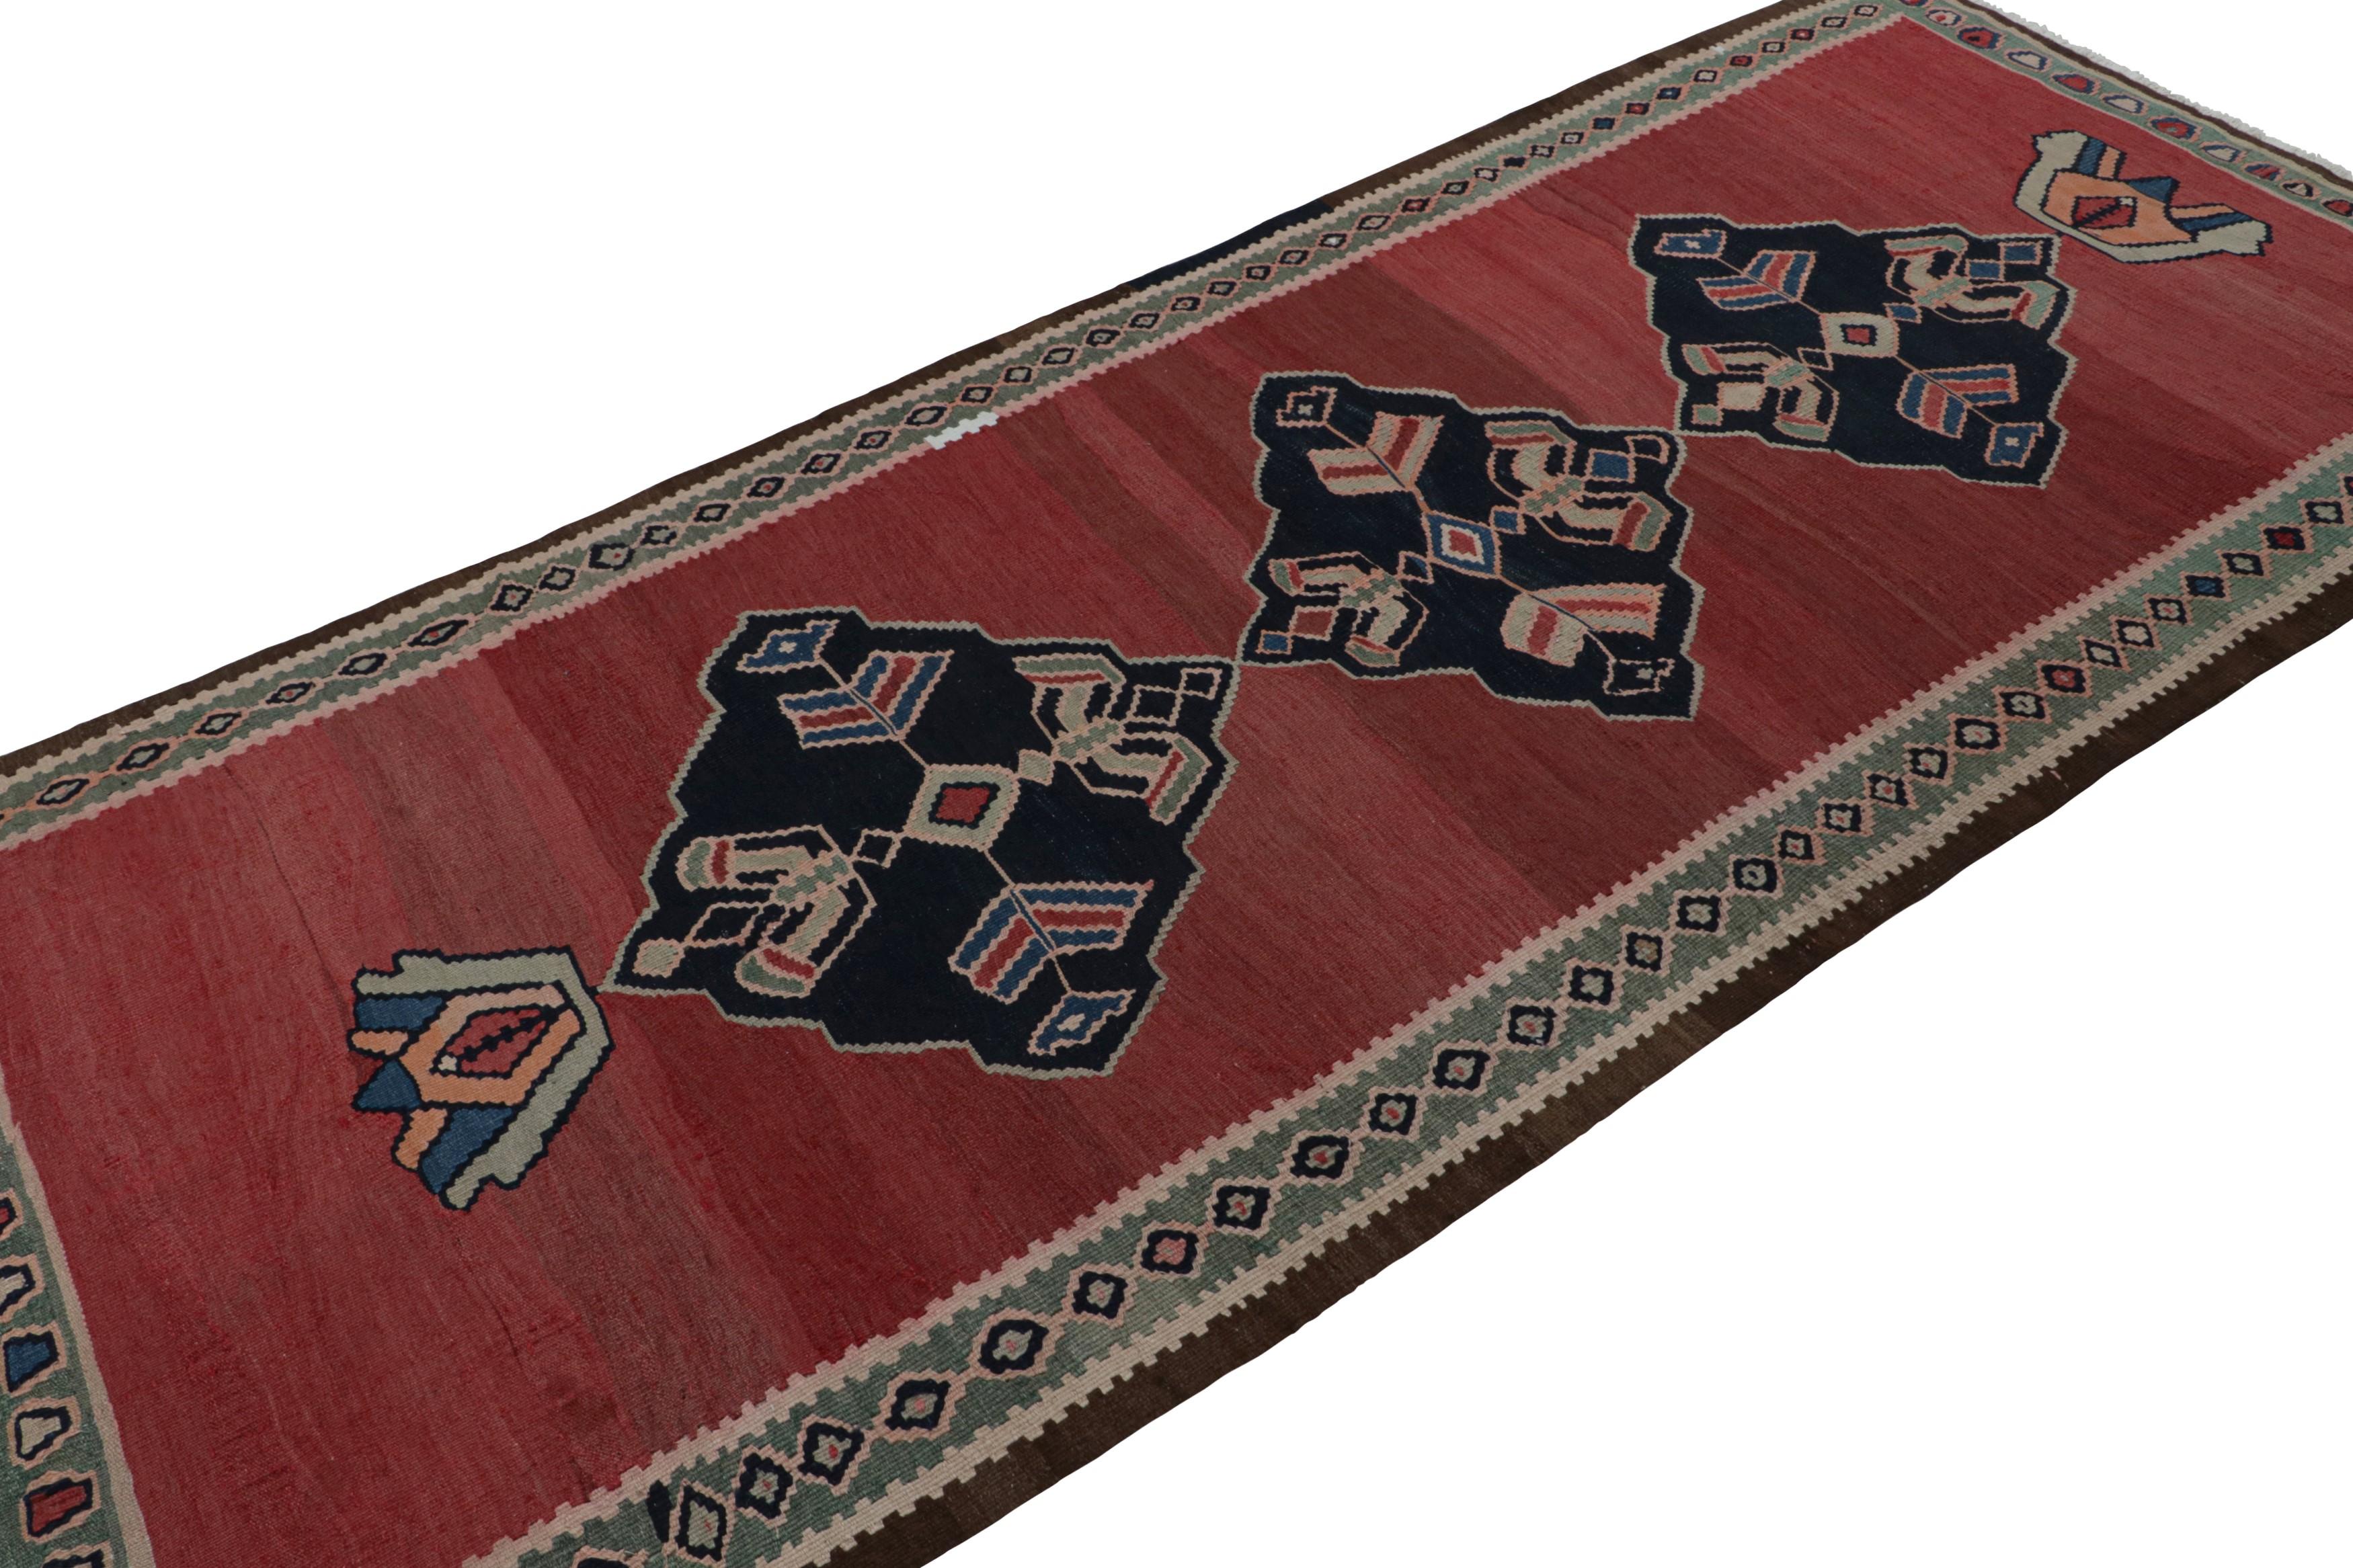 Handwoven in wool, circa 1950-1960, this 4x9 Afghani tribal Kilim rug, features an open red field and midnight blue medallions, along with several bright, playful colors but especially present pink and bright green notes.  

On the design: 

A